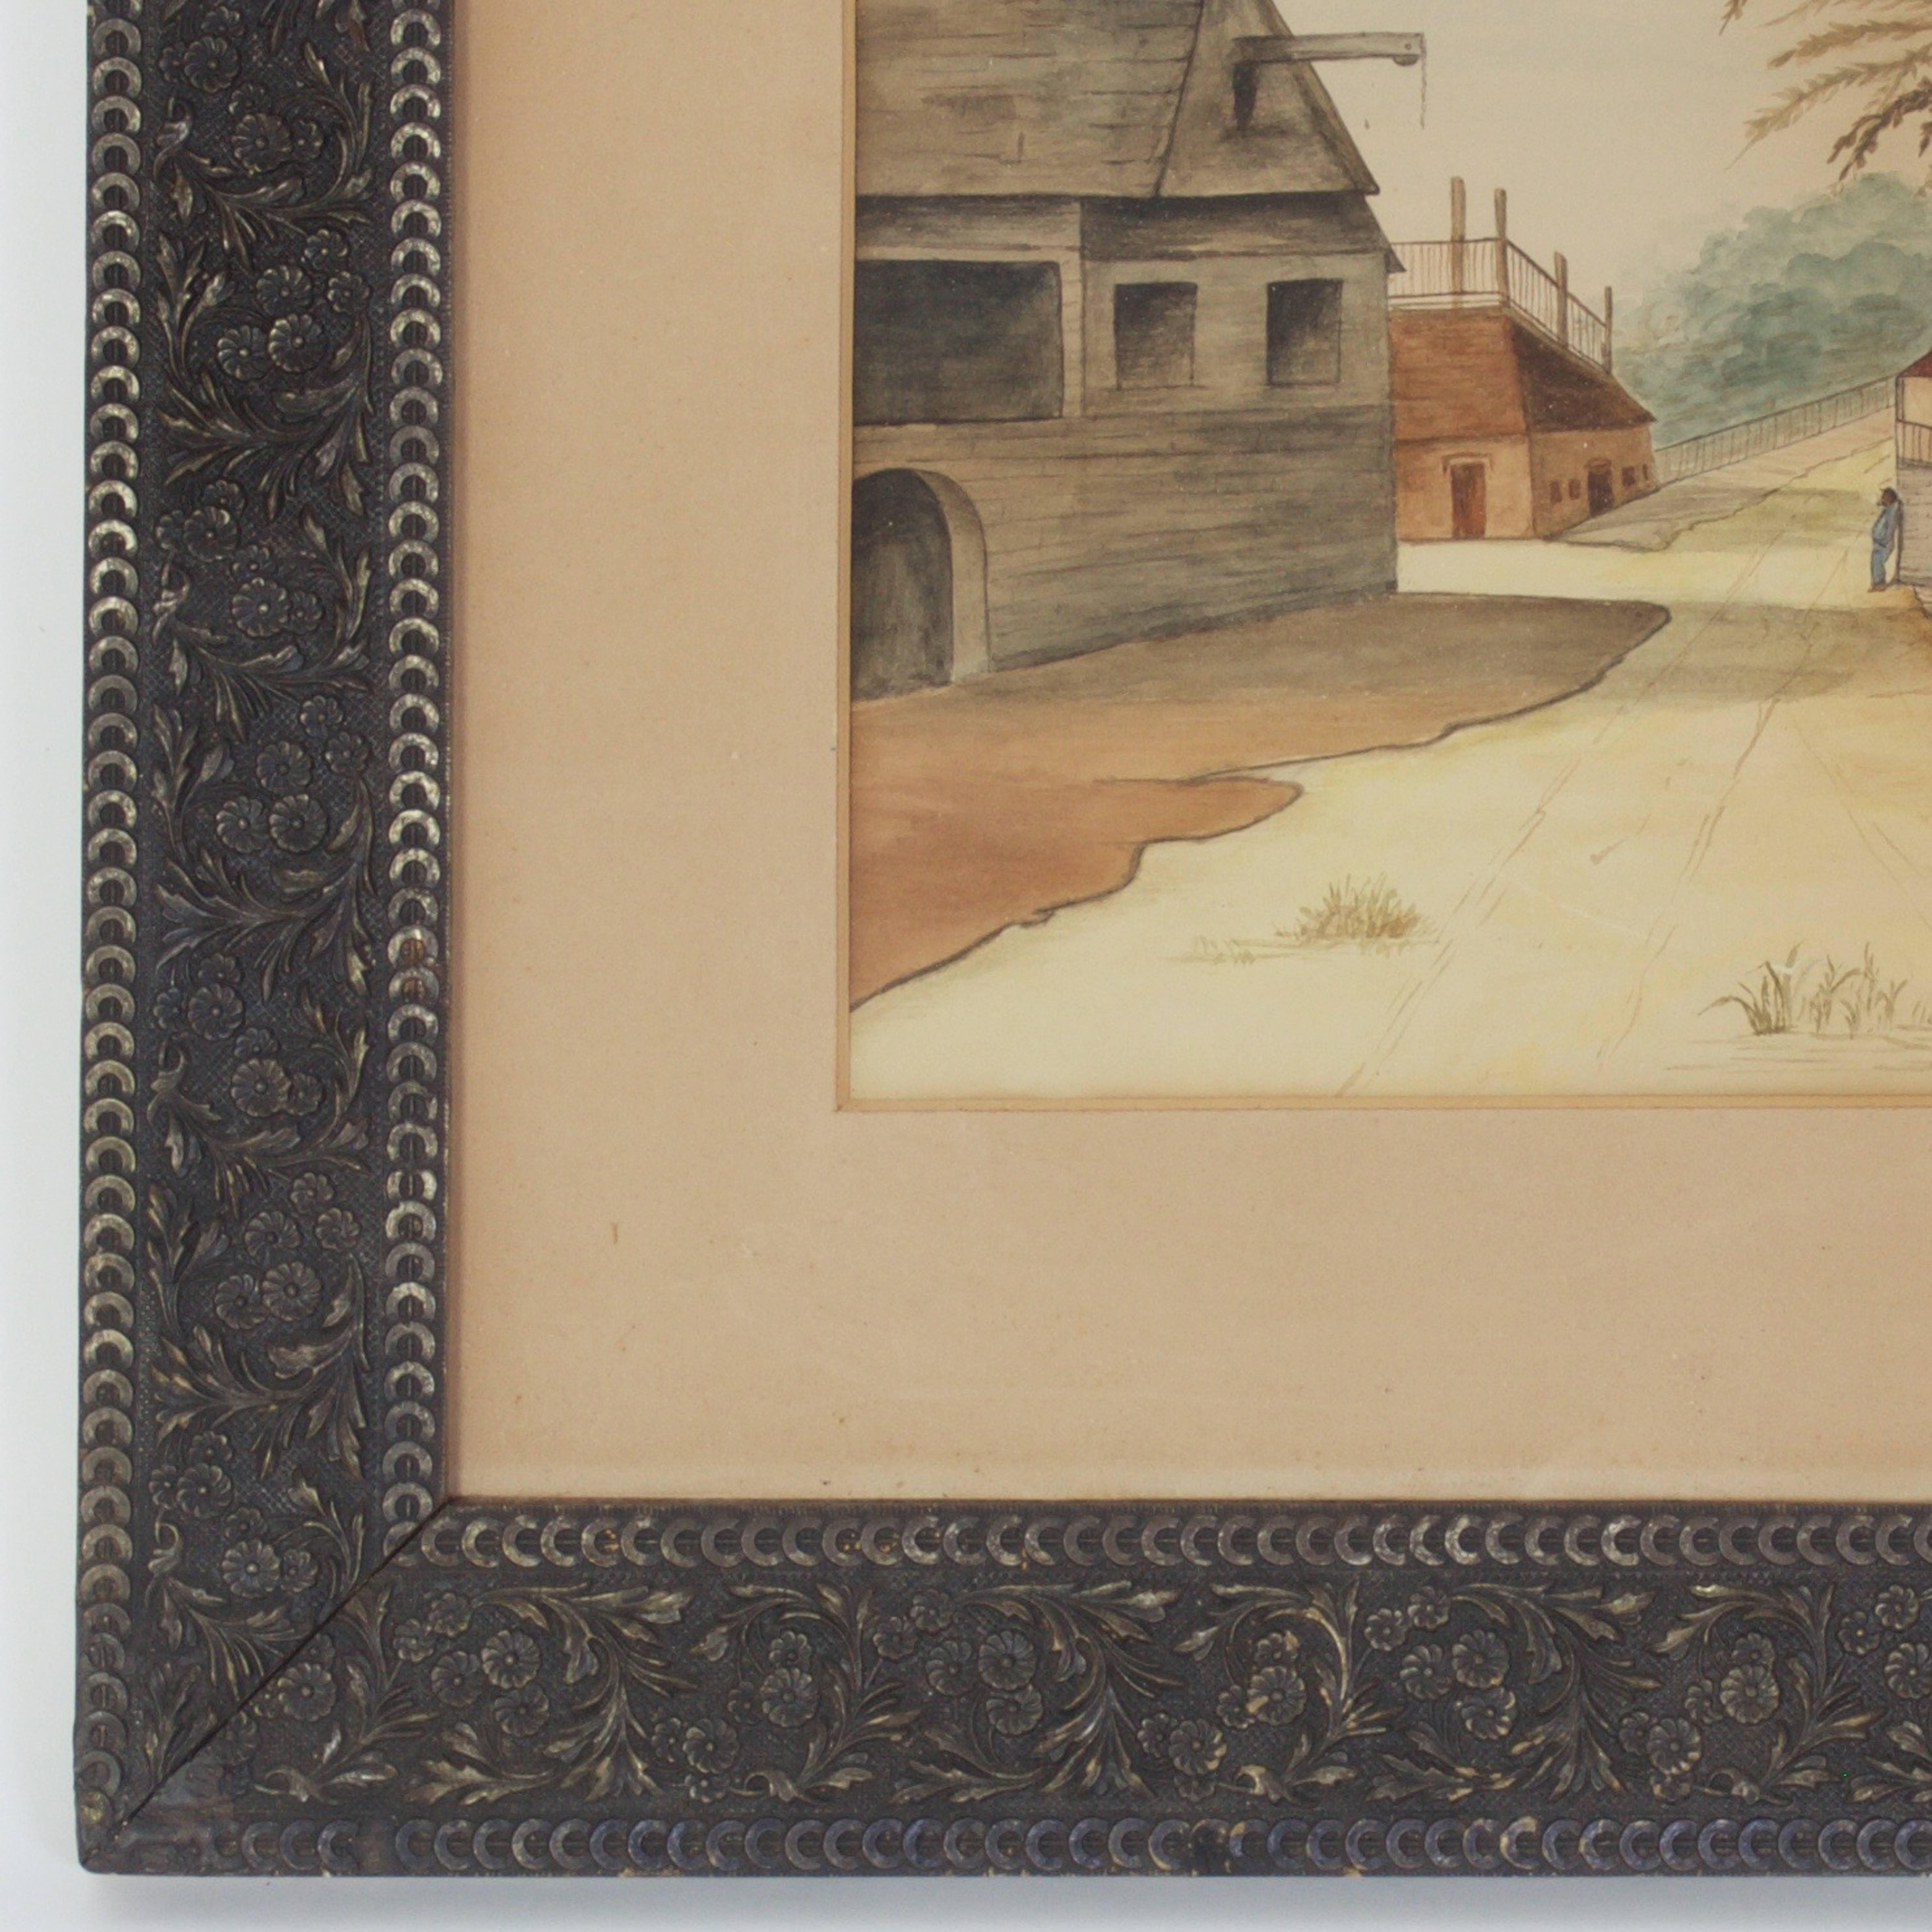 Caribbean  Tropical Watercolor Depicting a Rural Street Scene with a Date Palm 